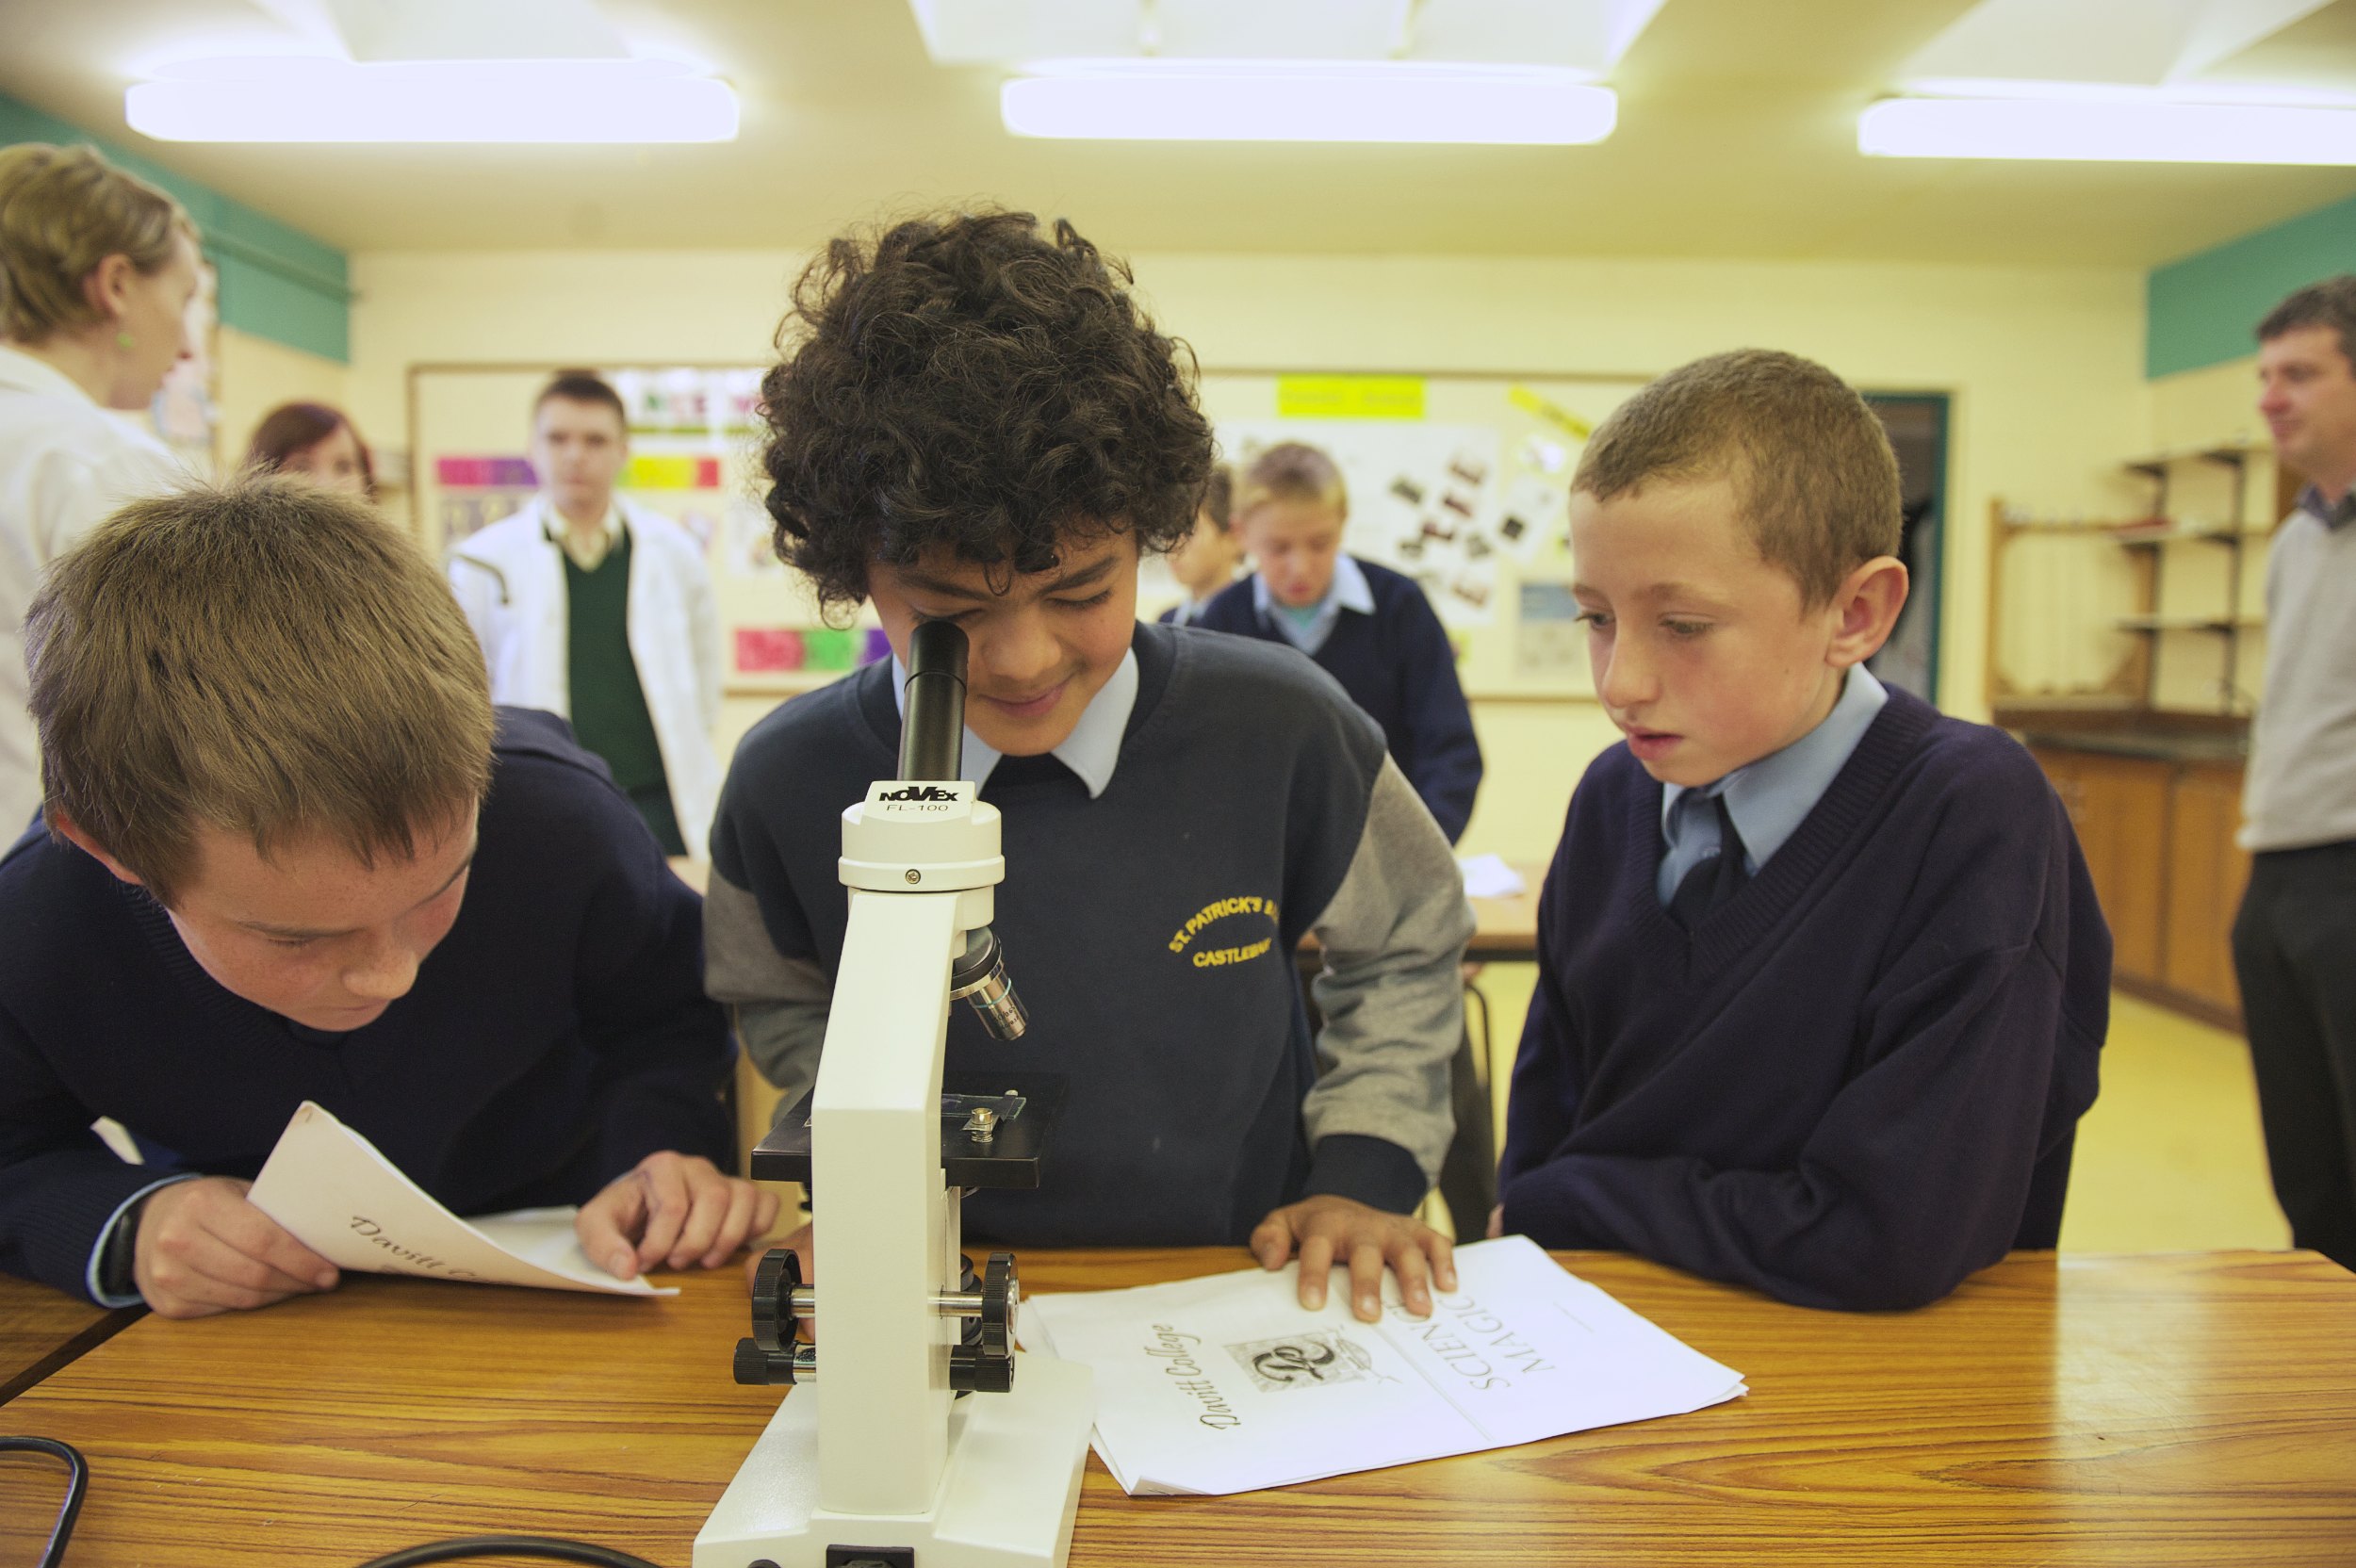 Boys from St. Patricks School, Castlebar examine plant cells during Science Week at Davitt College. This was just one in a range of Science Experiments and Computer Programming events that took place over the three day science and technology event.